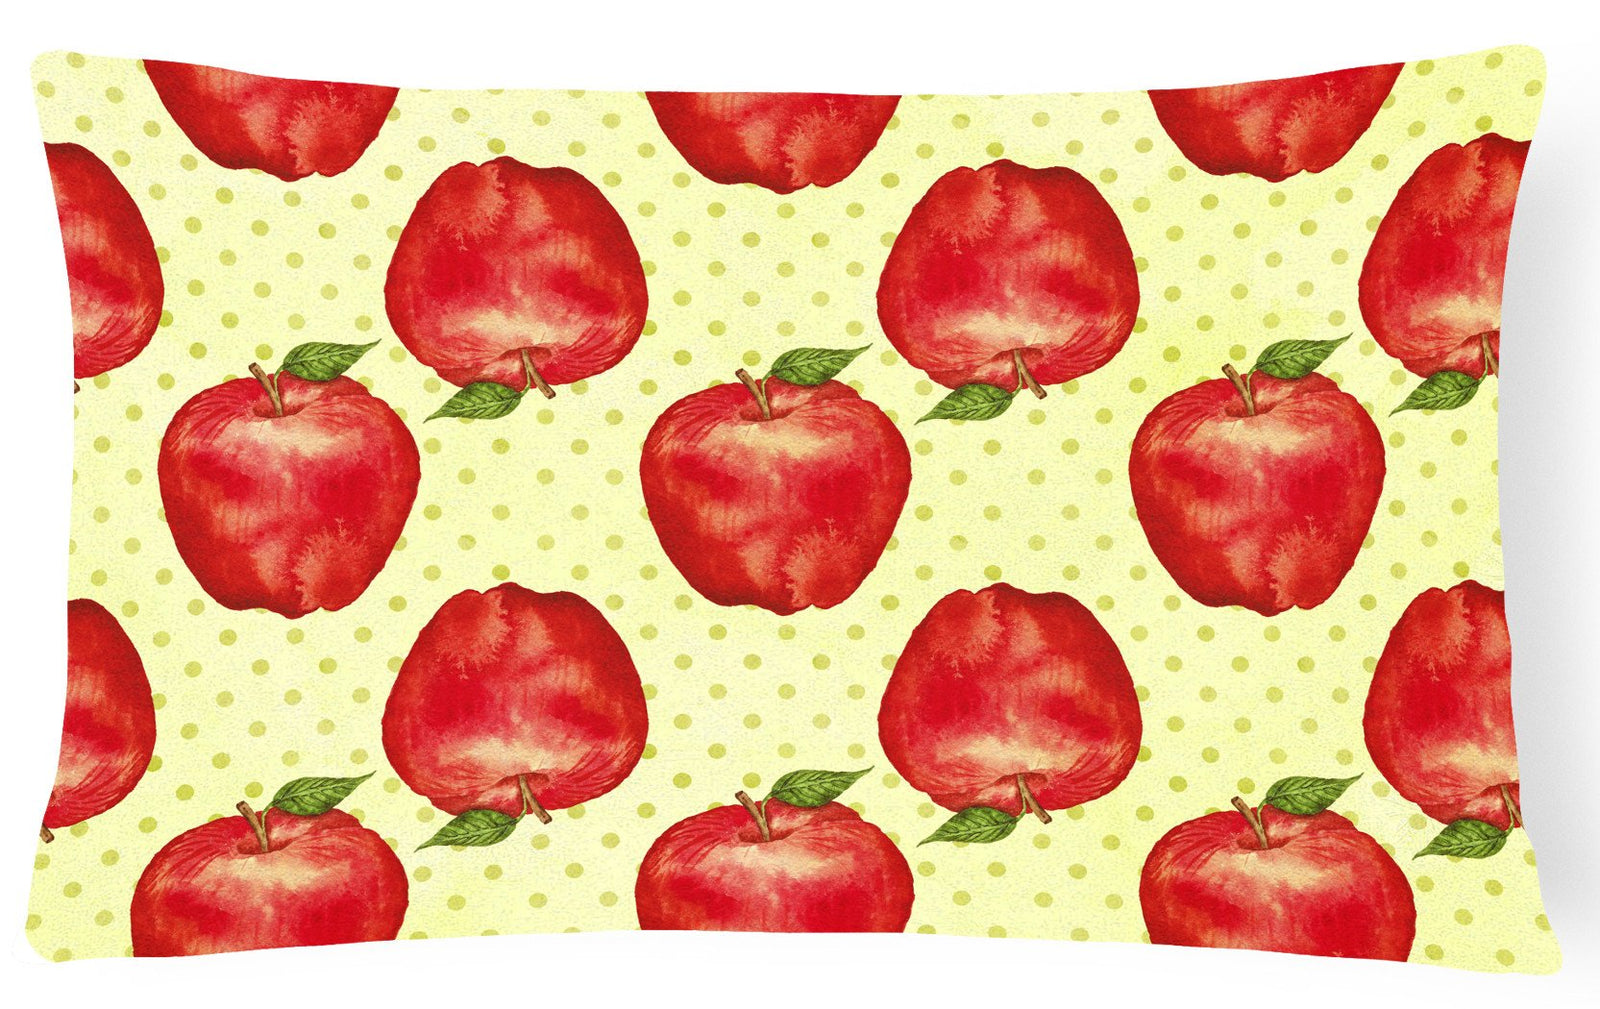 Watercolor Apples and Polkadots Canvas Fabric Decorative Pillow BB7516PW1216 by Caroline's Treasures